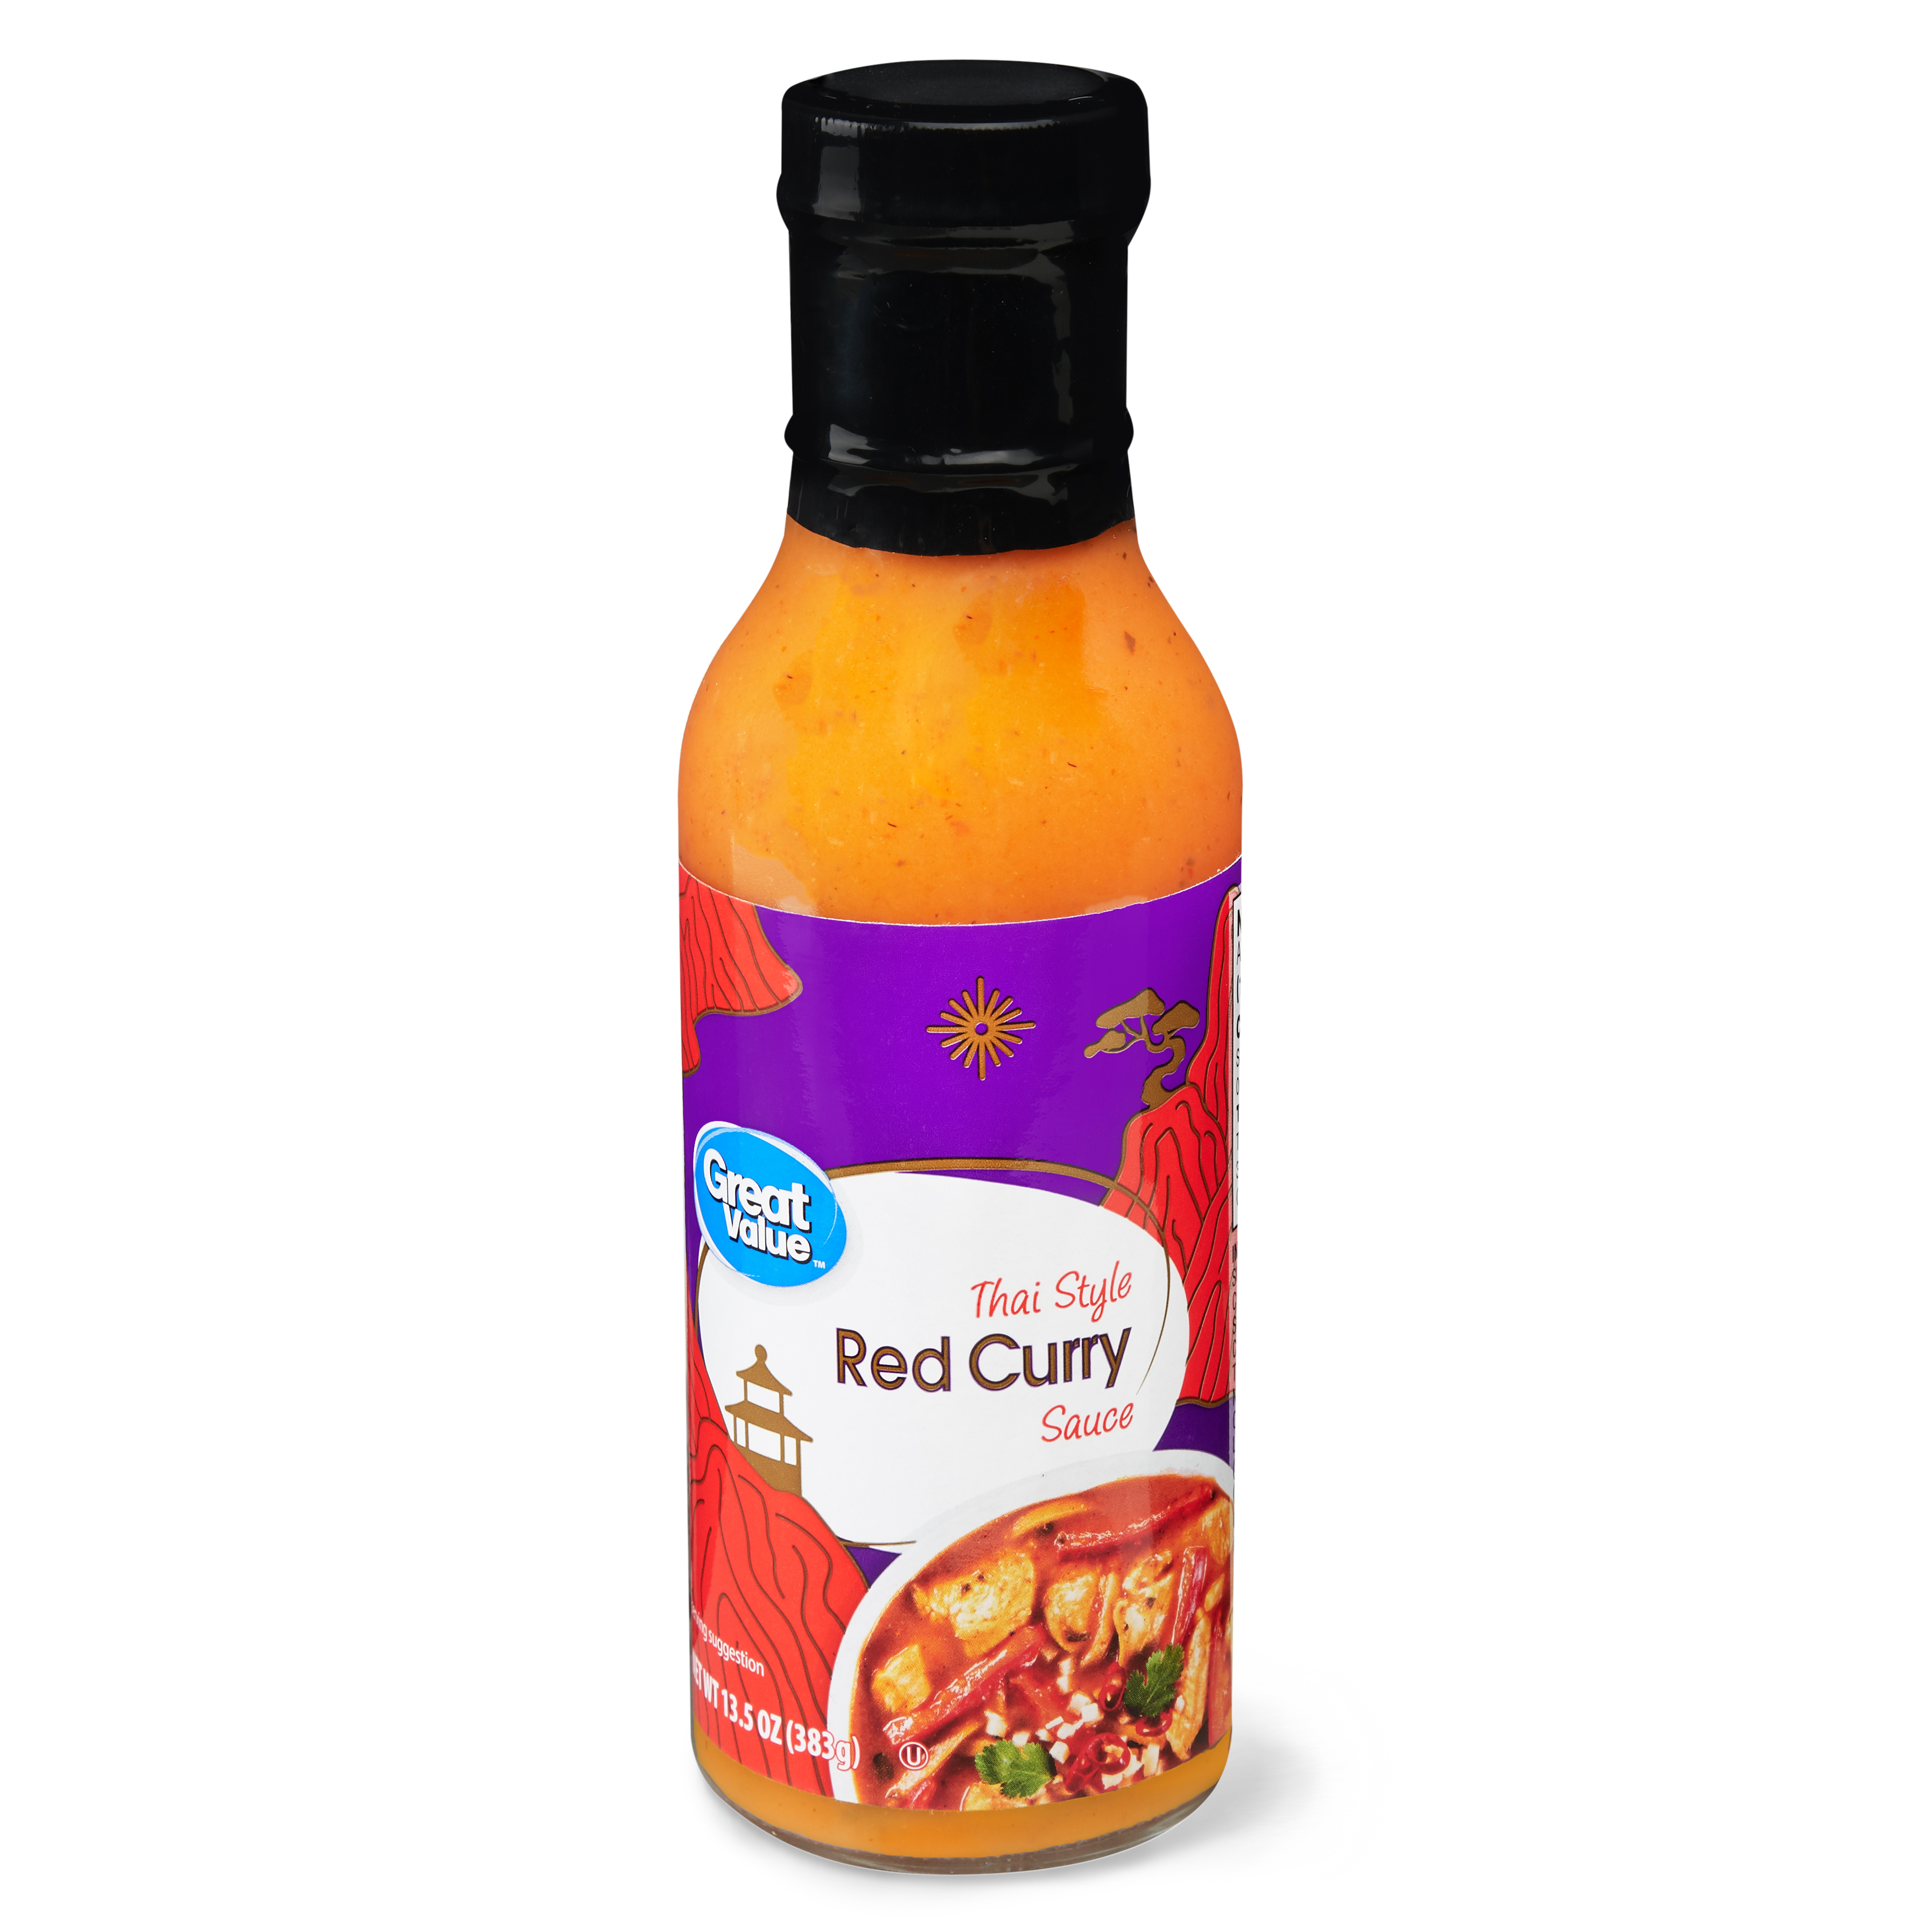 Great Value Thai Style Red Curry Sauce, 13.5 Oz